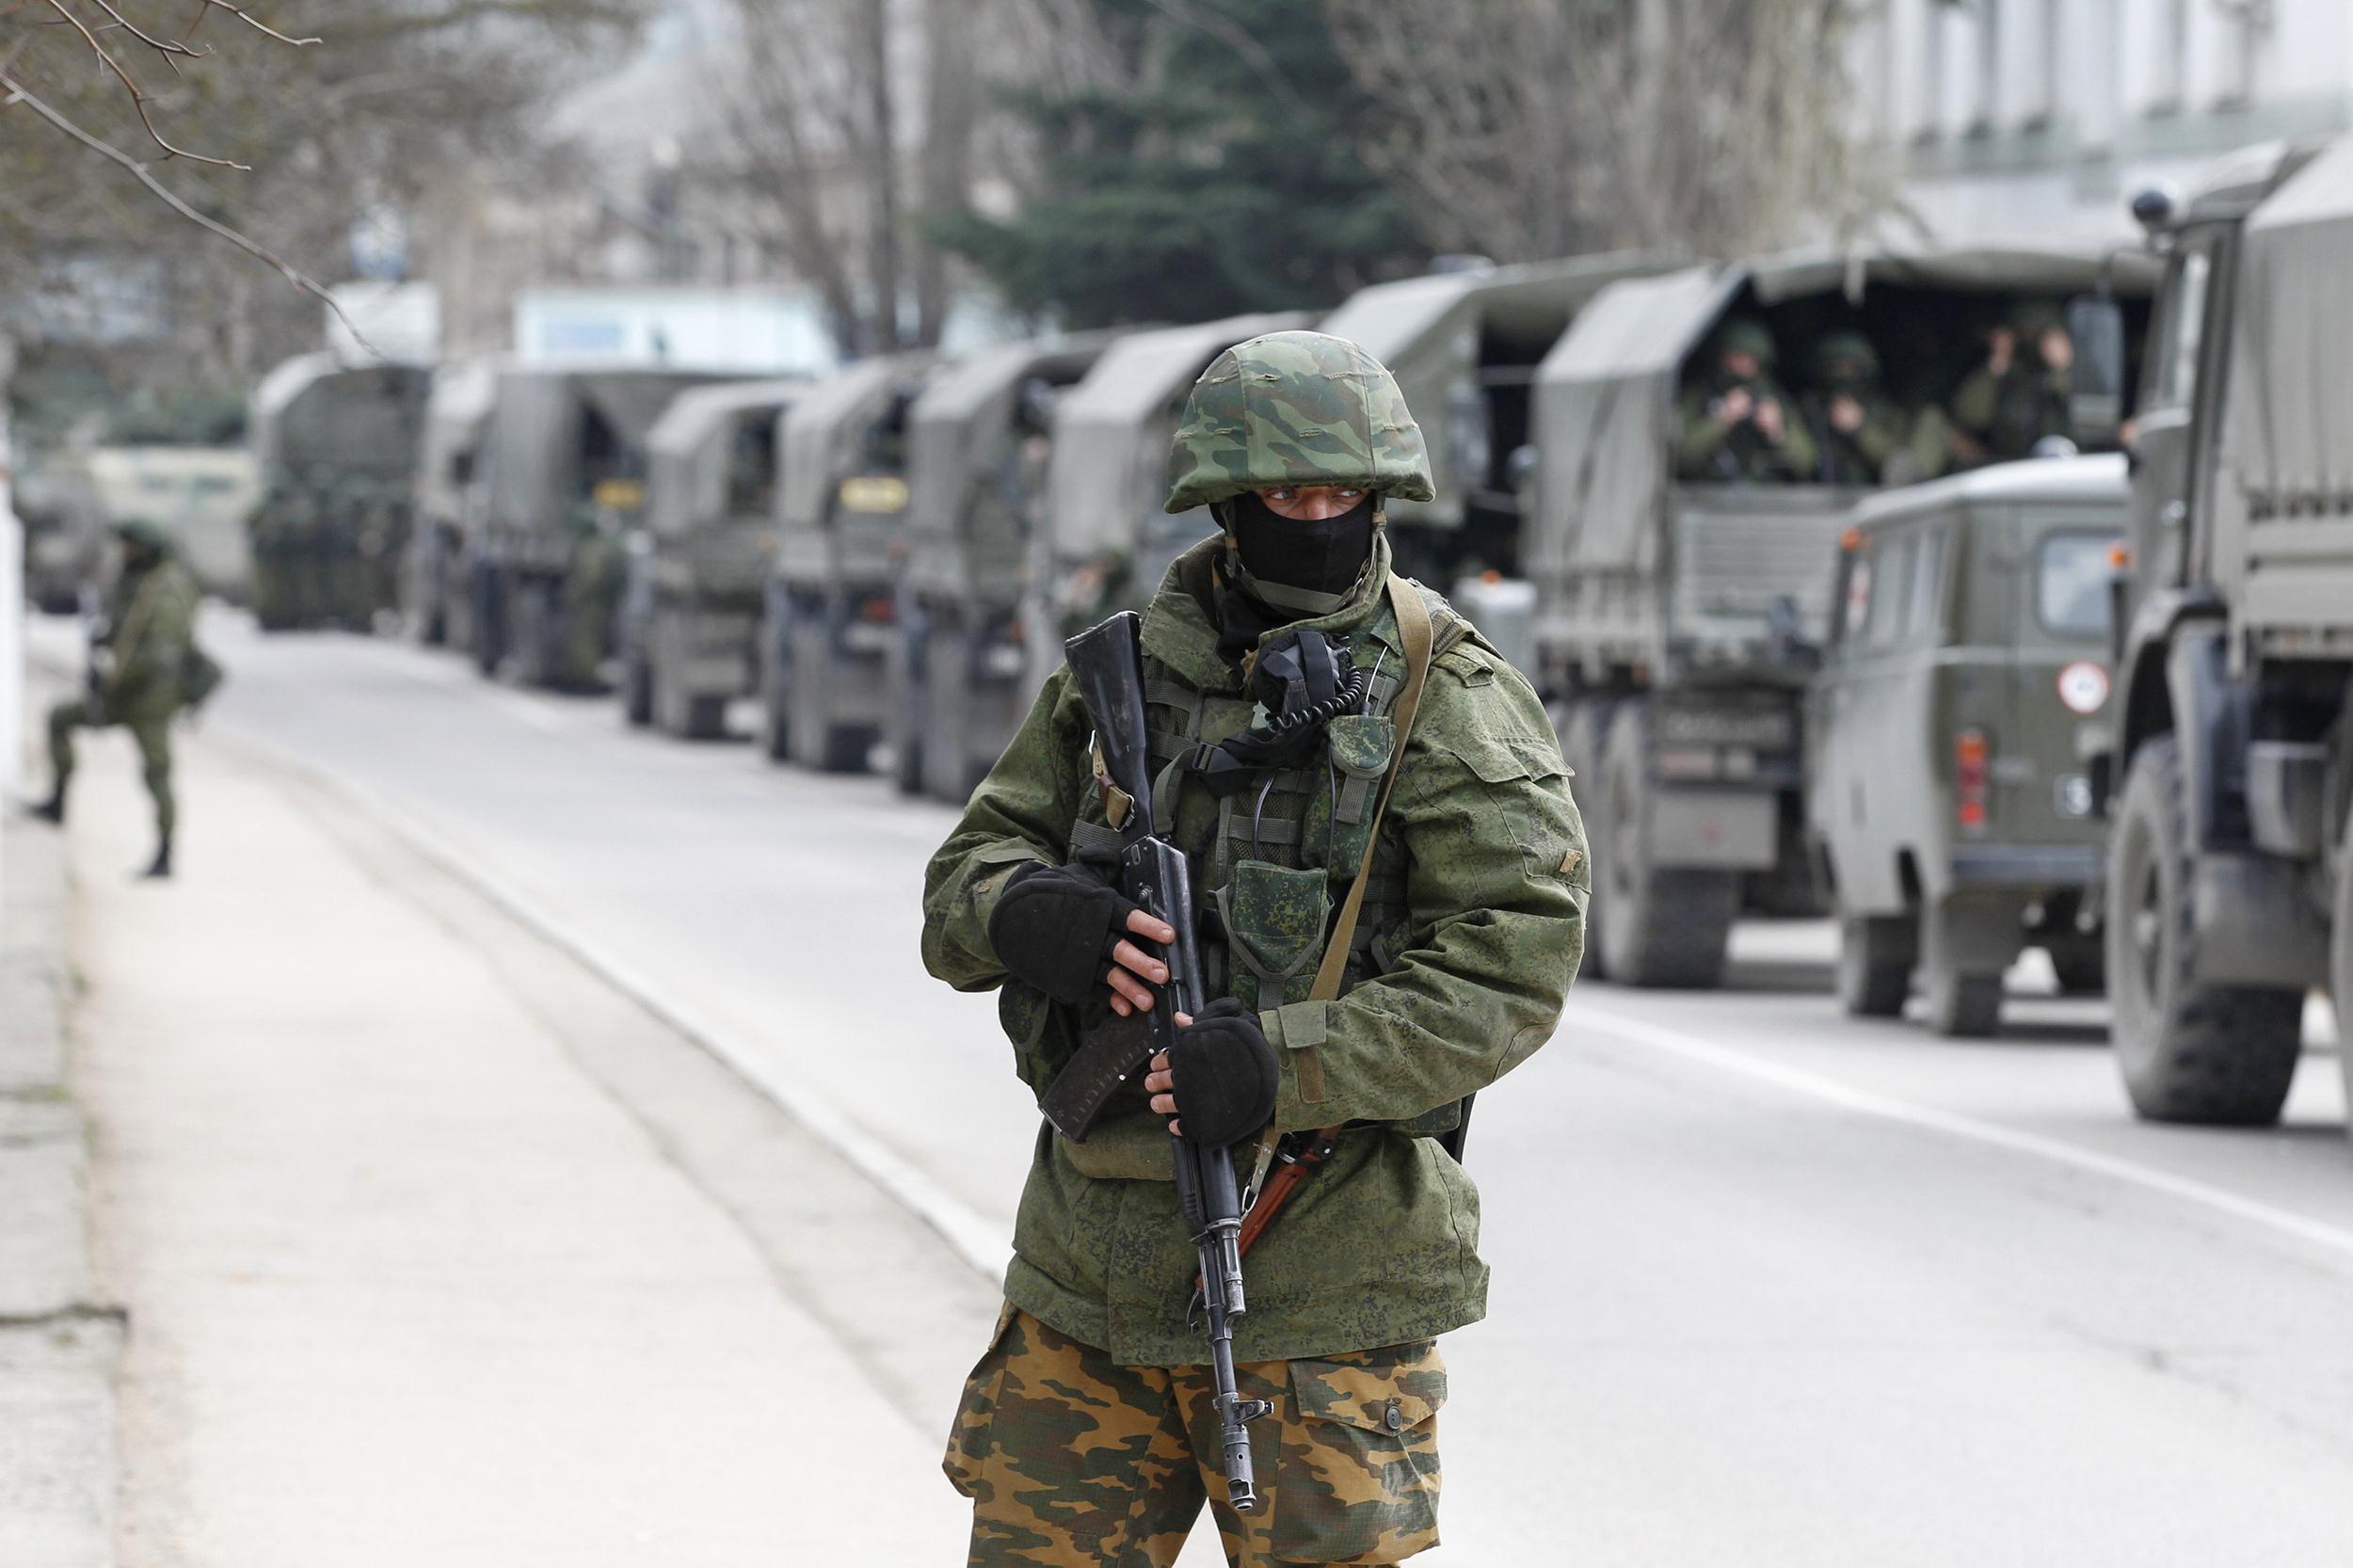 How many troops does Russia need to occupy Ukraine?